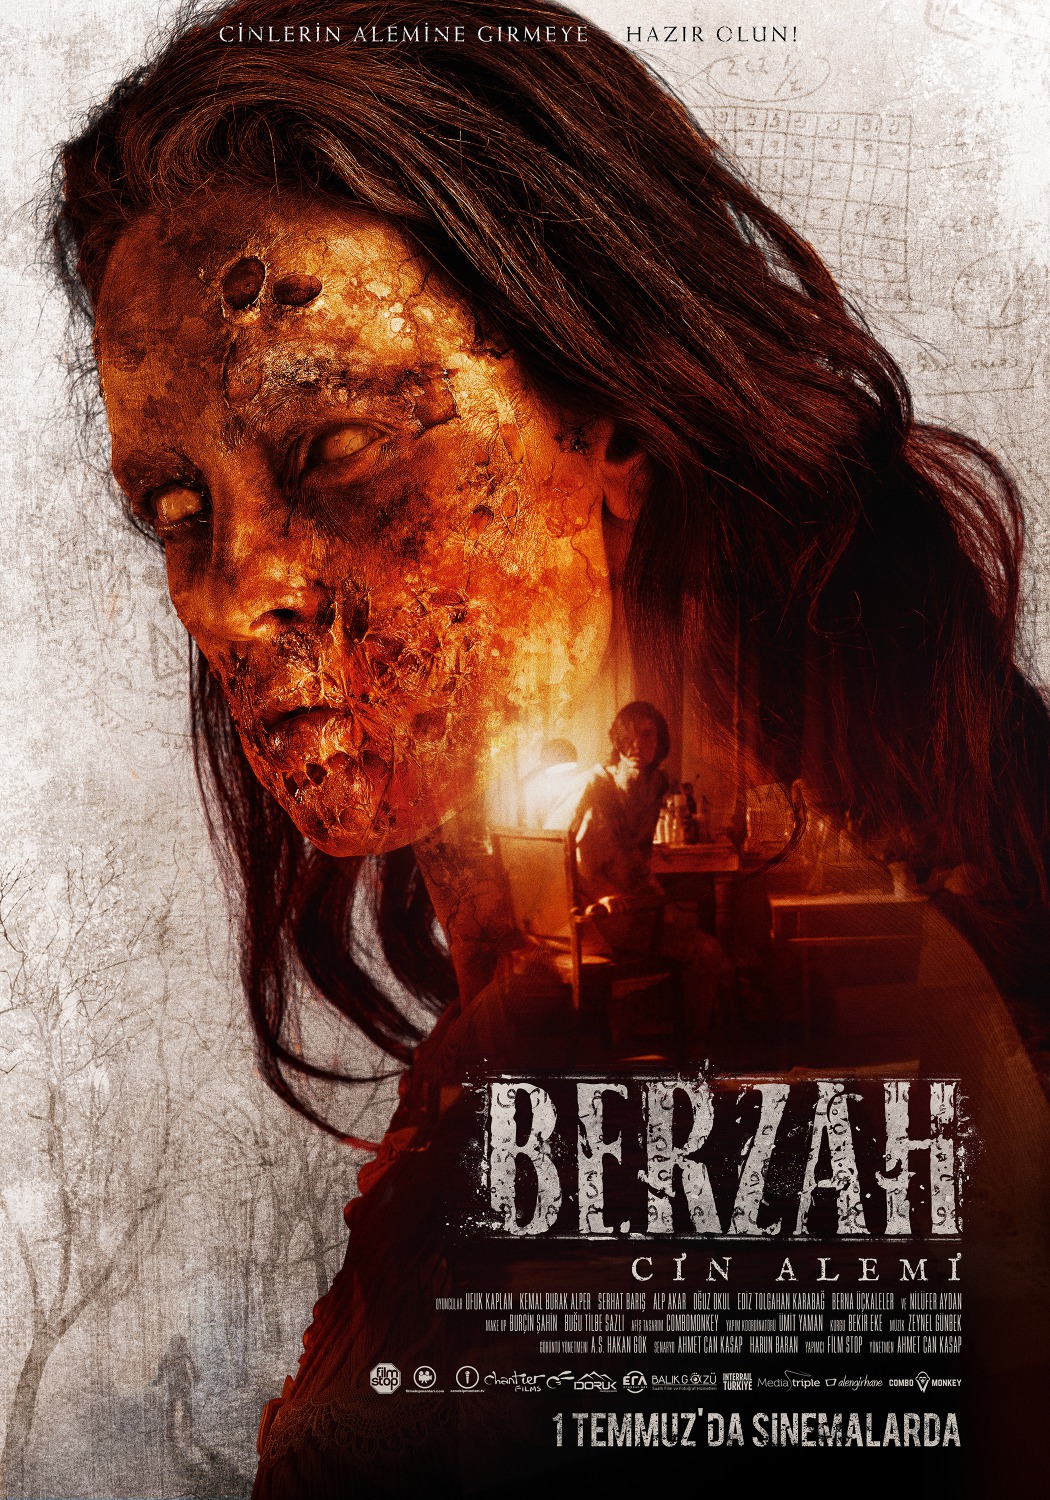 Extra Large Movie Poster Image for Berzah: Cin Alemi (#2 of 3)